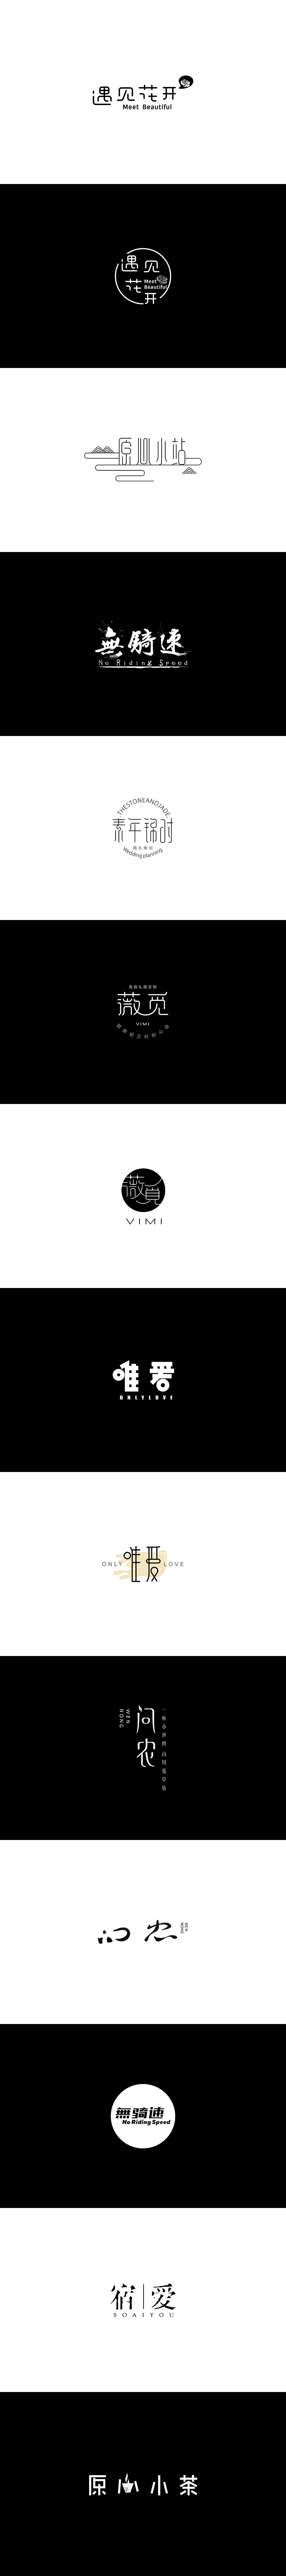 60+ Large number of Chinese fonts logo design